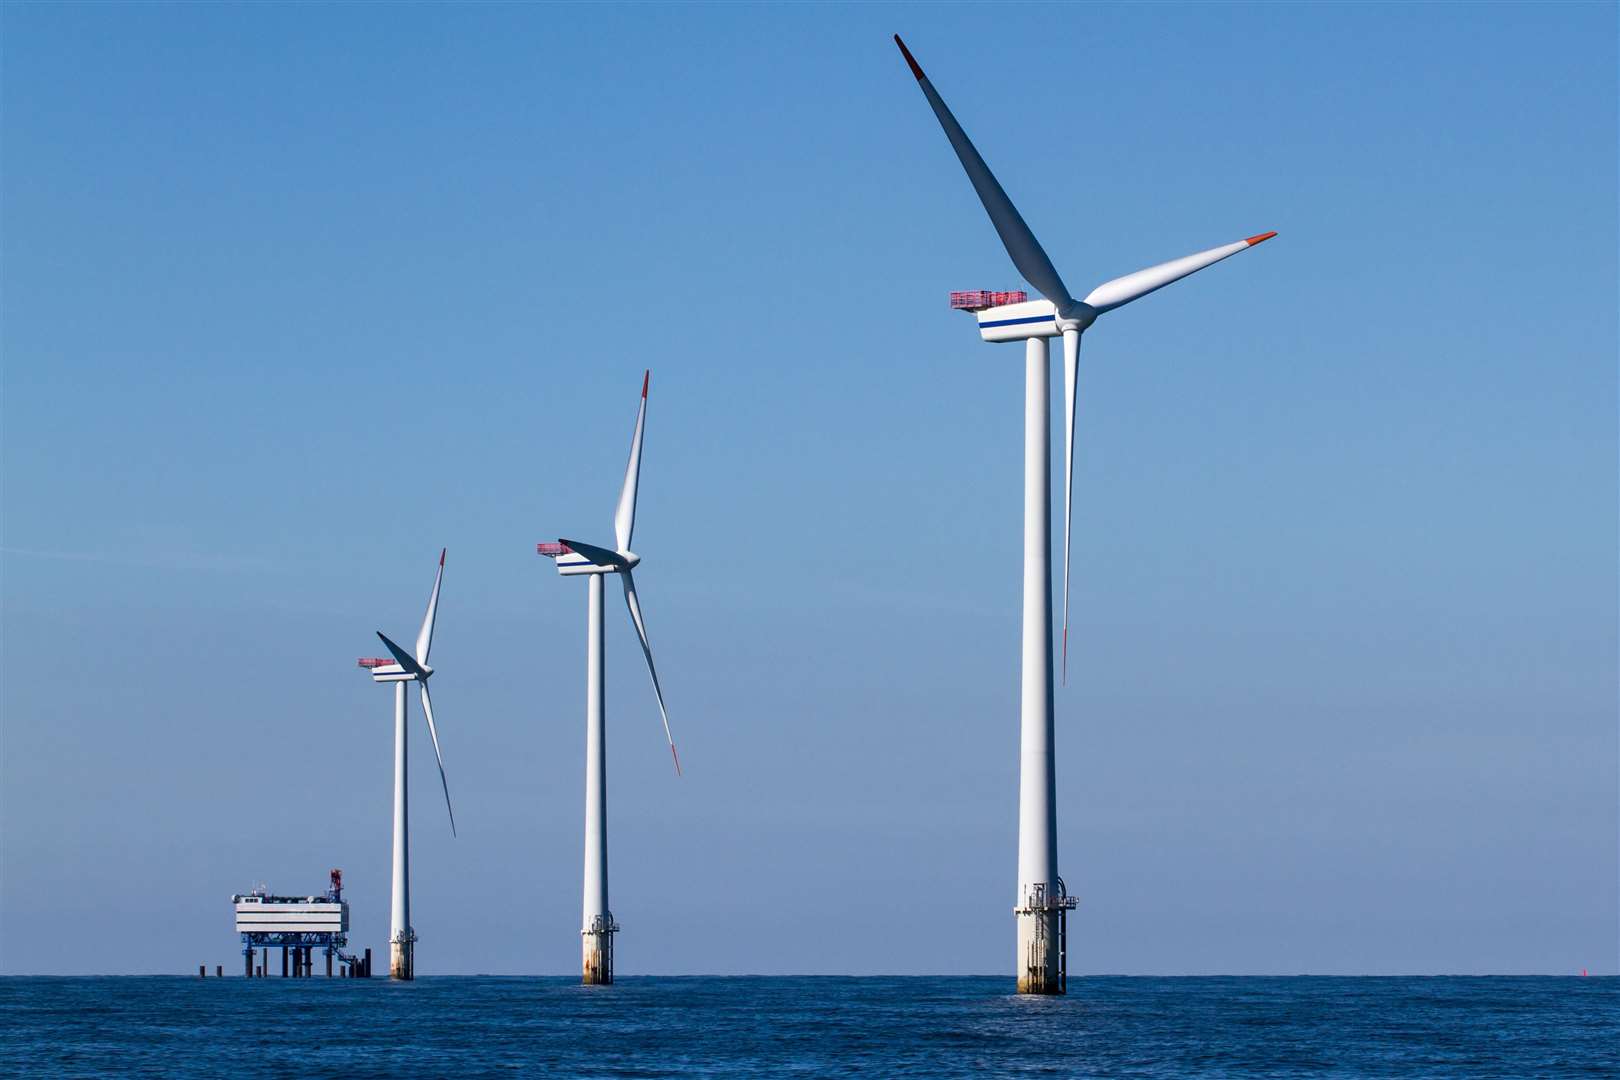 The Scottish Government wants to see Scotland's offshore wind sector increase to 11 GW capability within a decade.